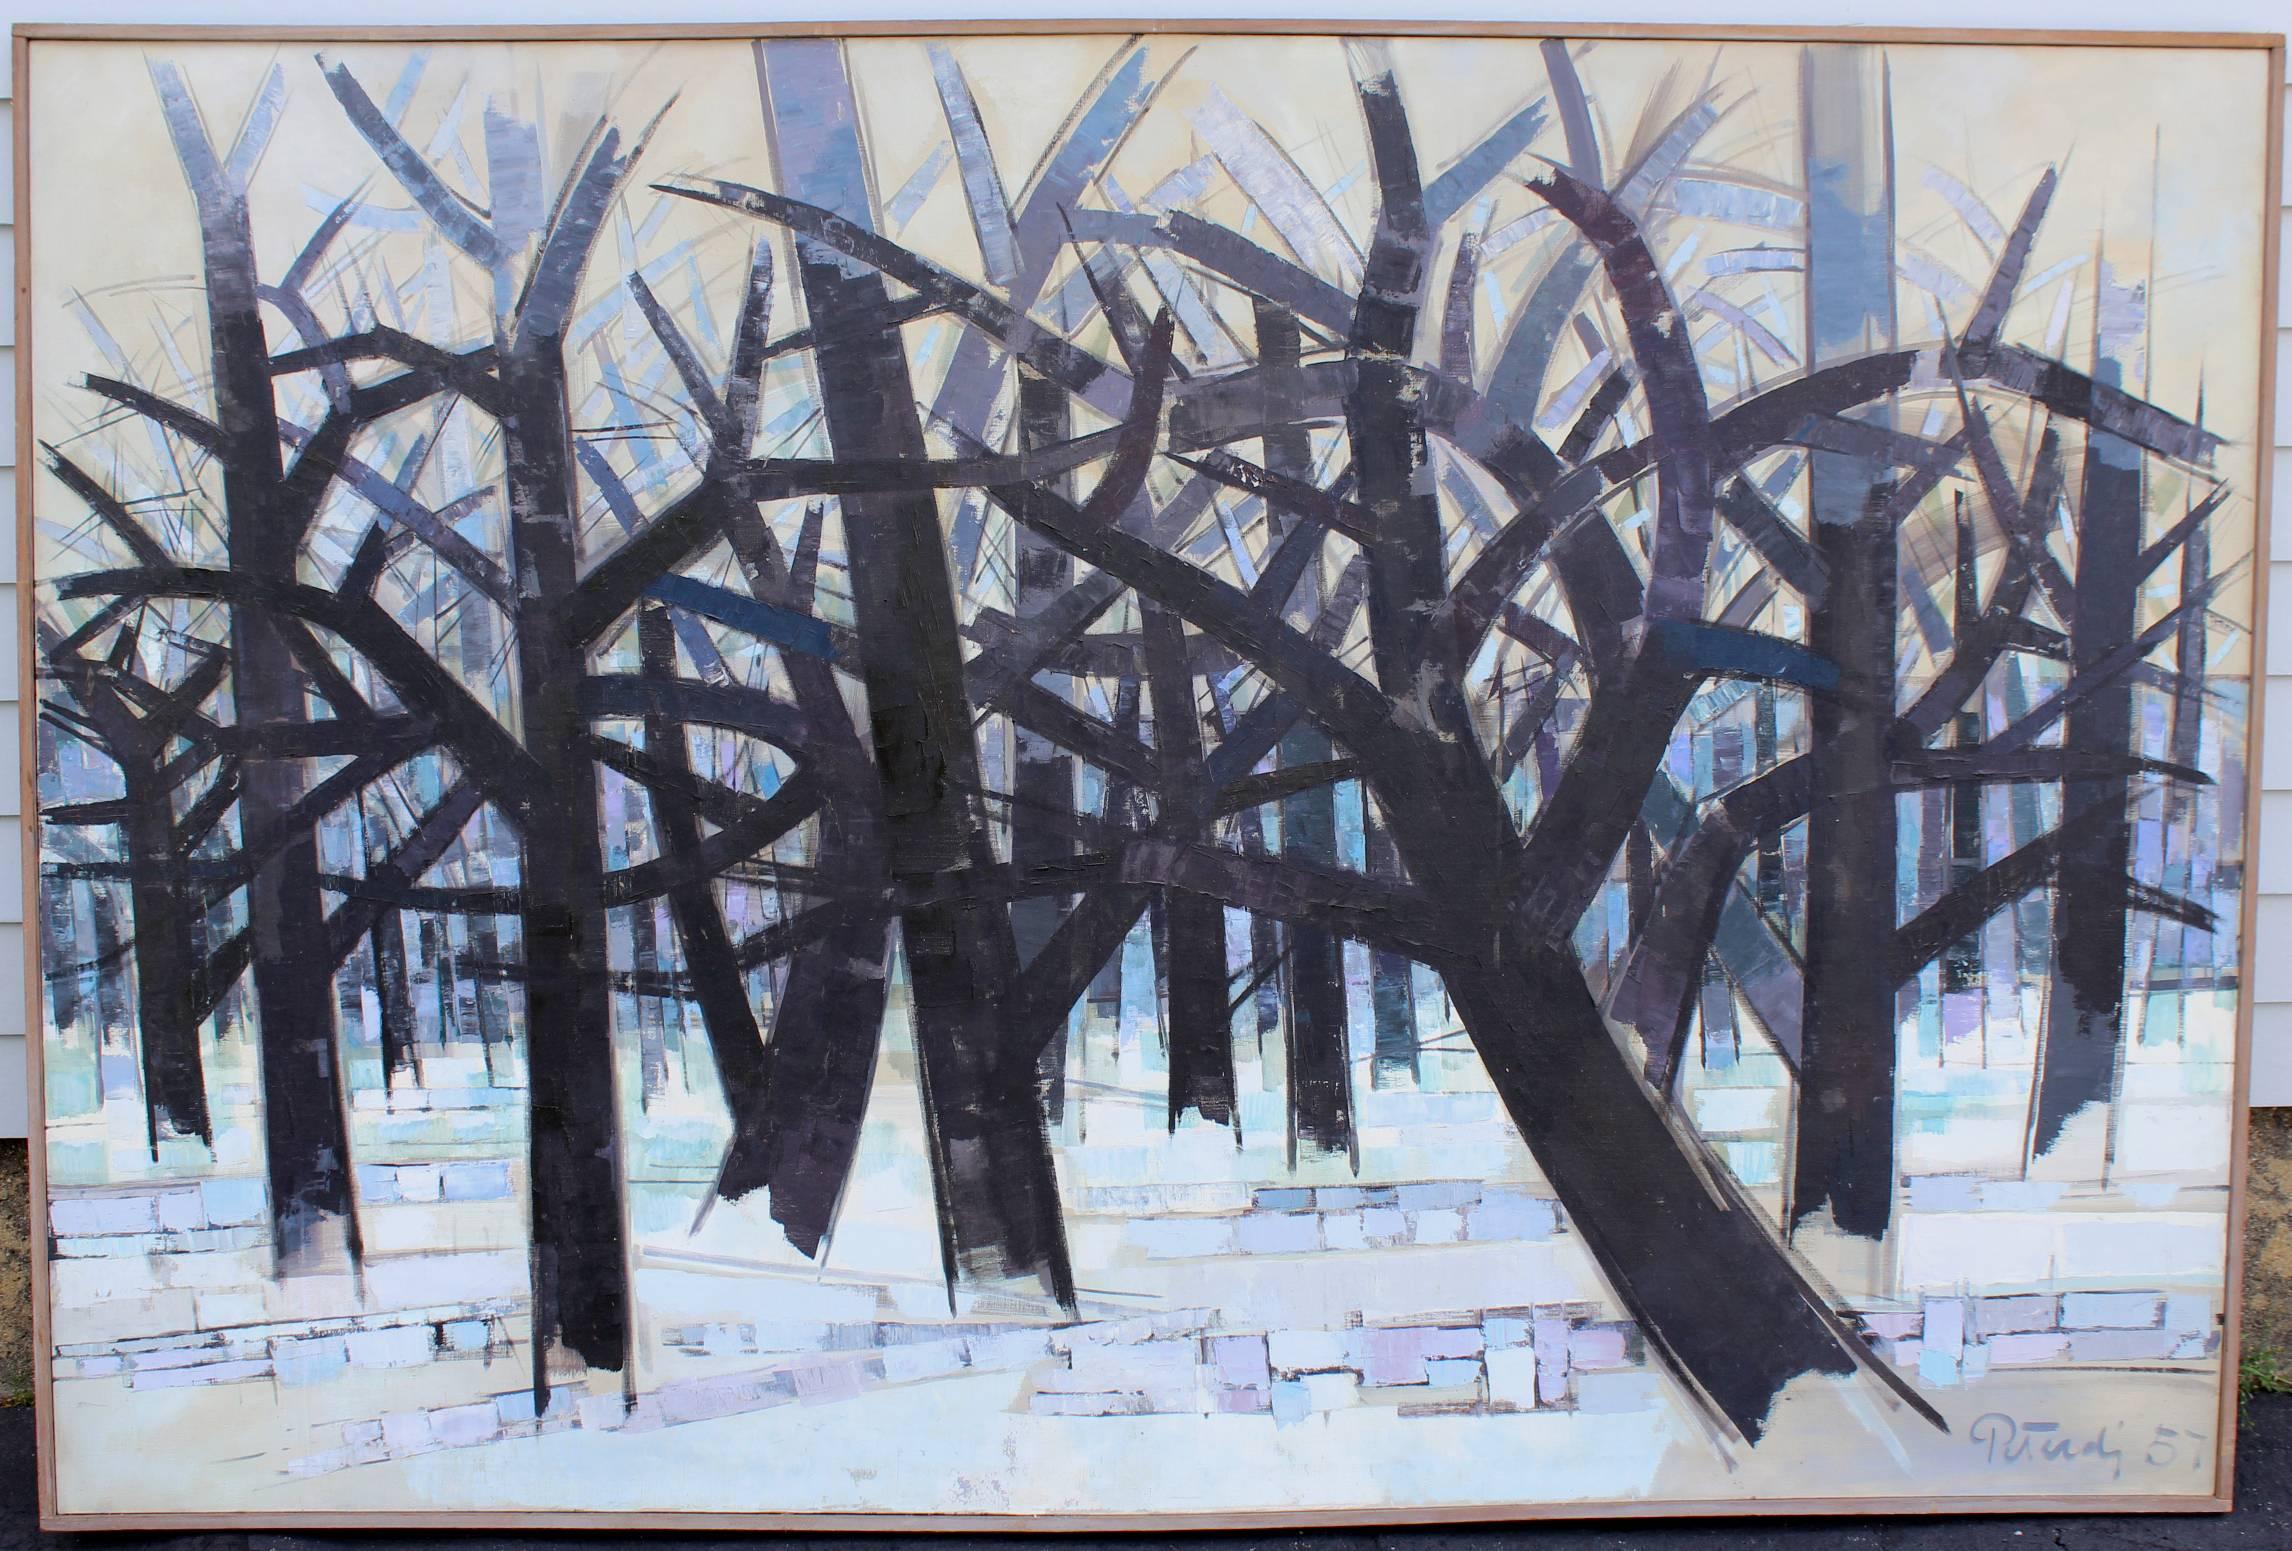 This large modernist oil painting of a winterscape was painted by Hungarian American artist Gabor Peterdi (1915-2001). Peterdi was born in Pestujhely, Hungary, studied at the Hungarian Academy of Fine Arts, the Academy Belle in Rome and the Academy